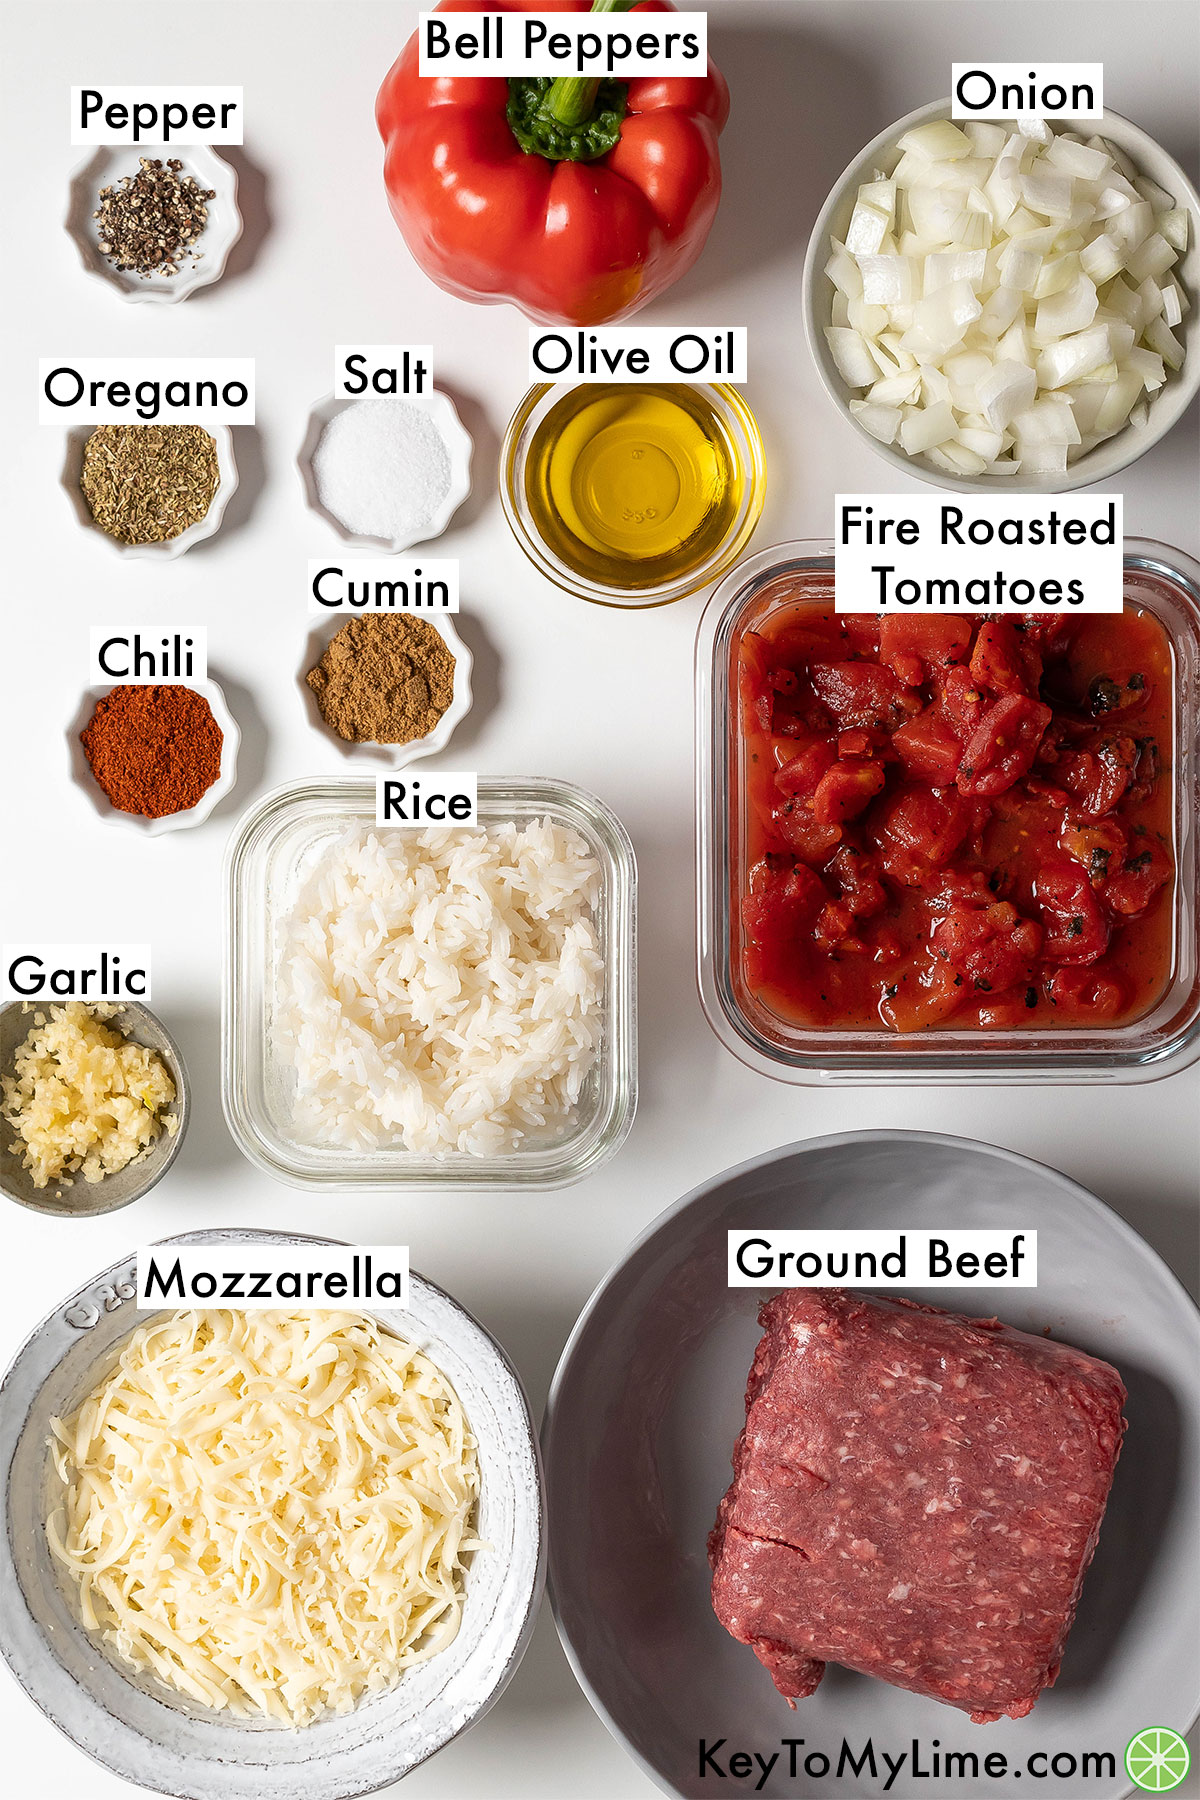 The labeled ingredients for stuffed peppers.